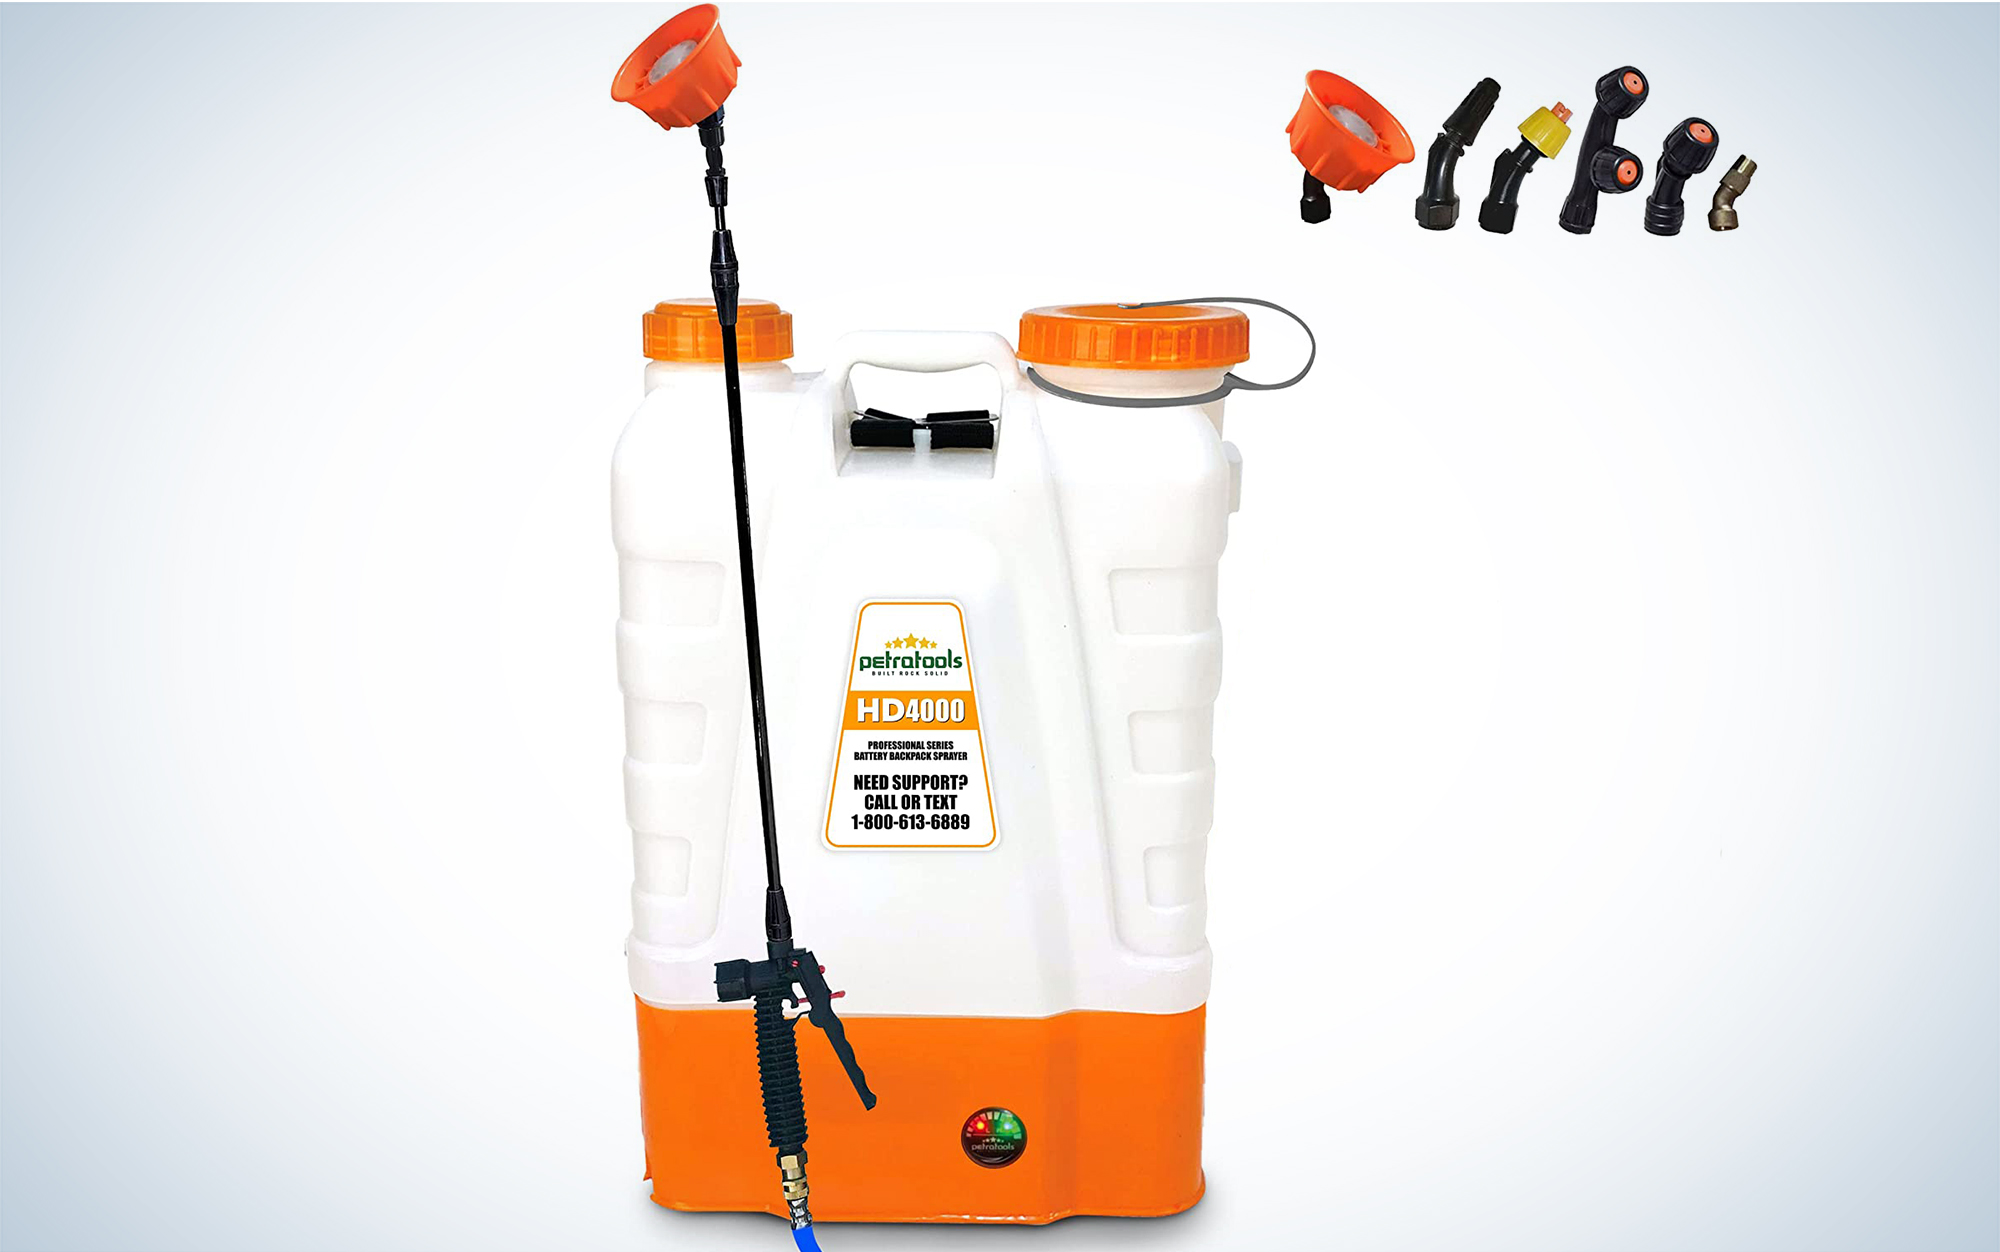 The PetraTools 4-Gallon HD4000 Battery Operated Backpack Sprayer is the best overall.